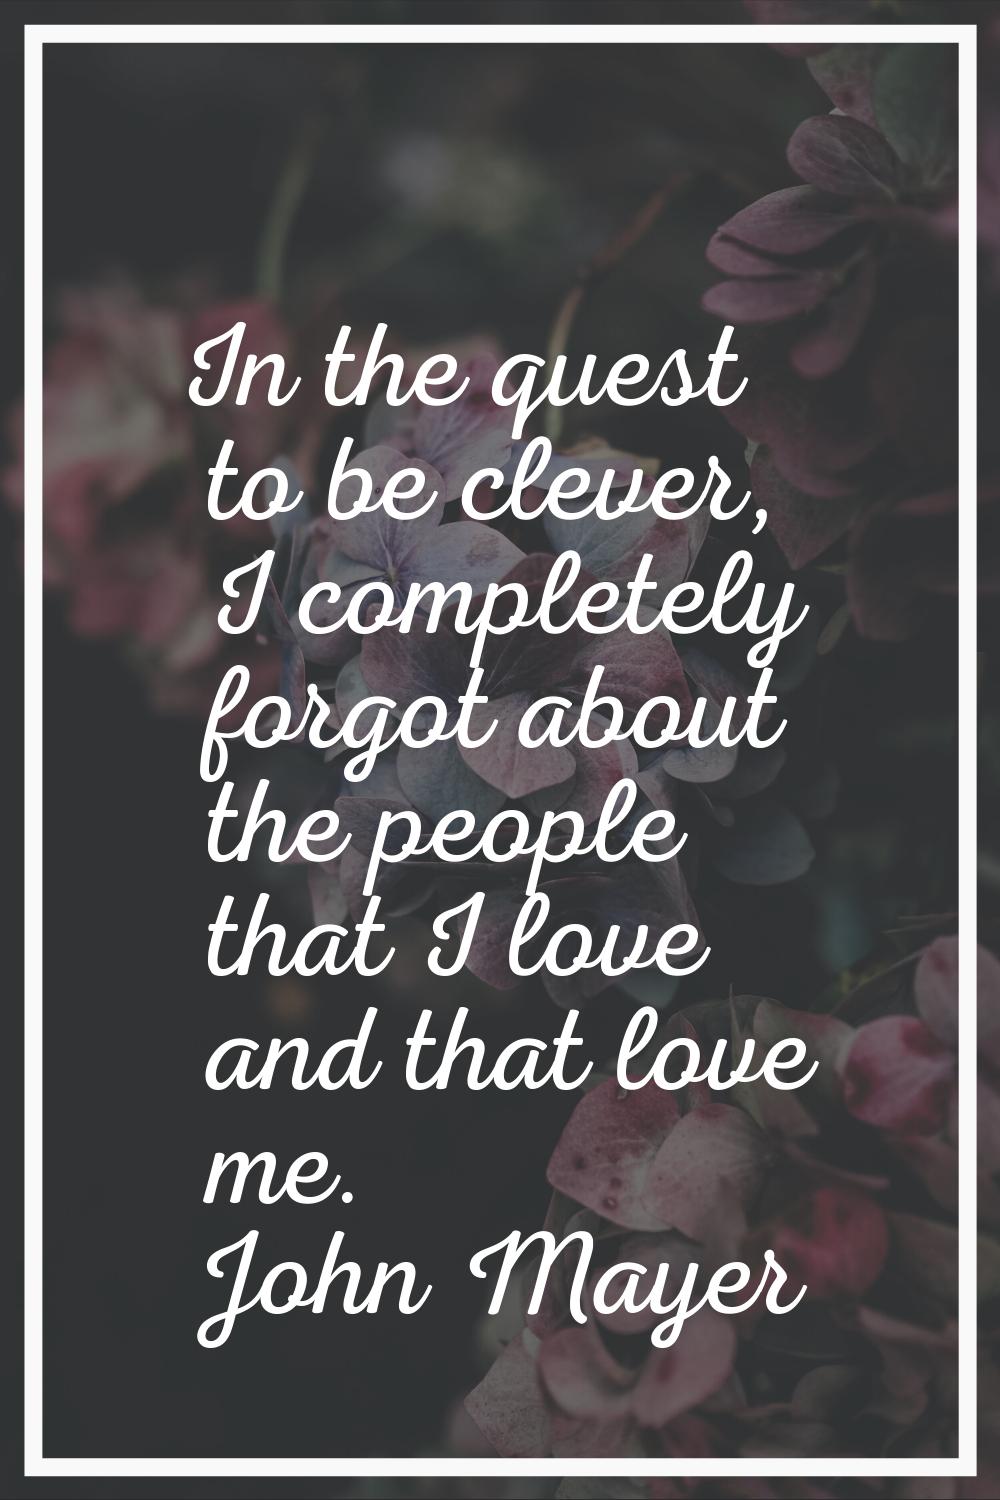 In the quest to be clever, I completely forgot about the people that I love and that love me.